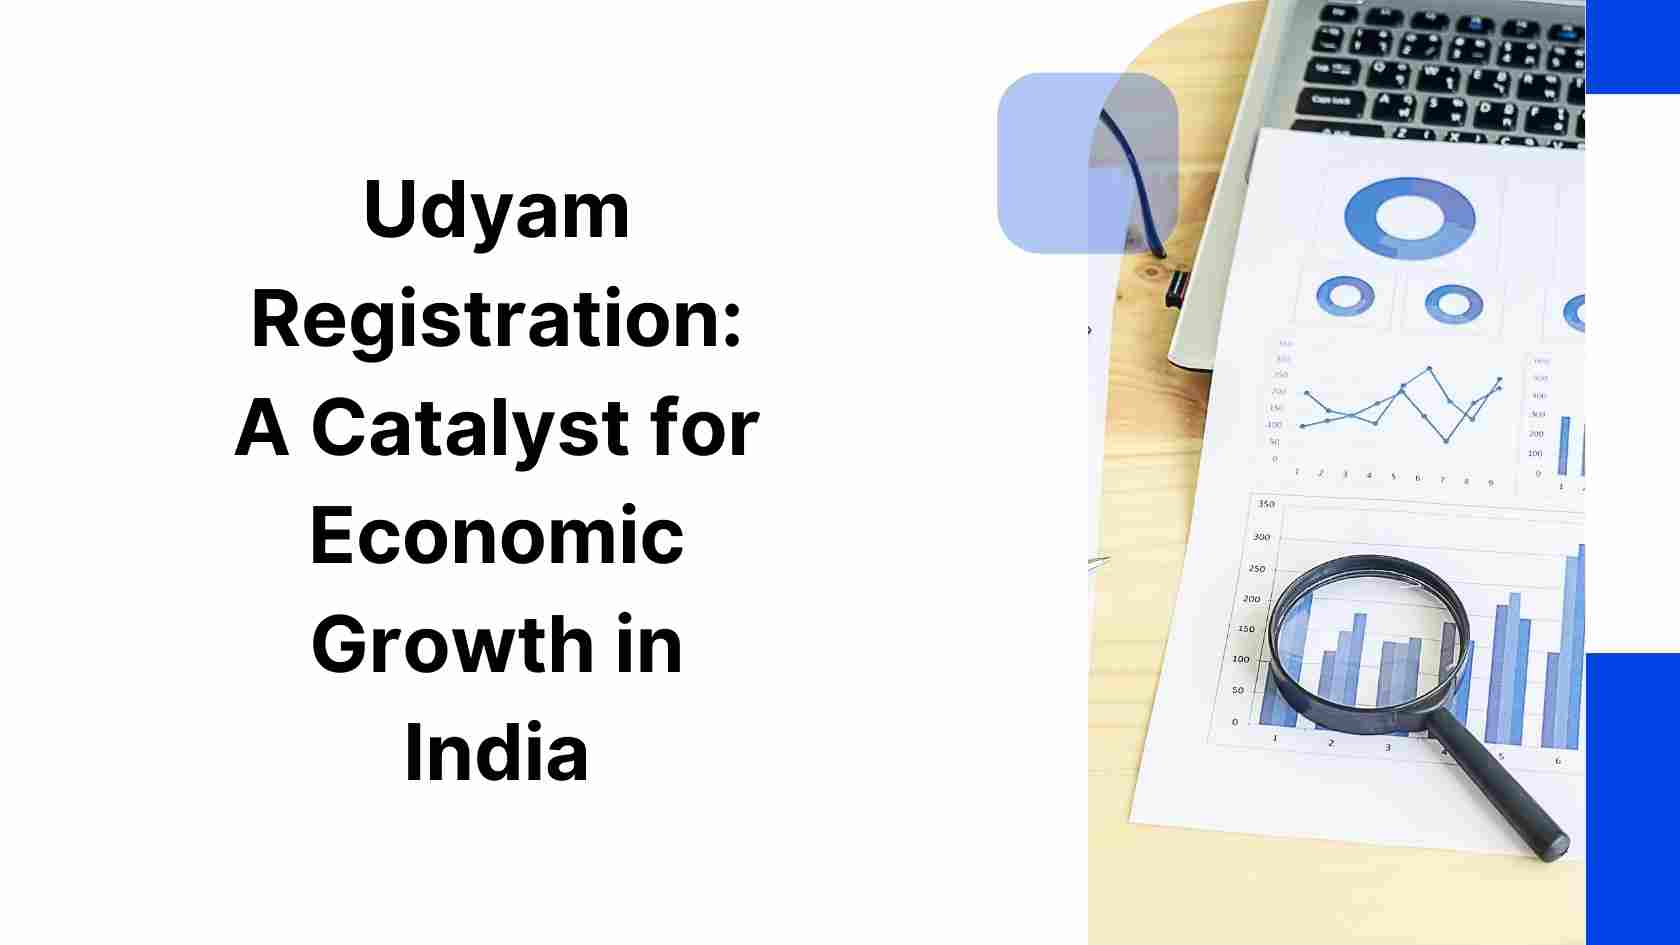 Udyam Registration A Catalyst for Economic Growth in India